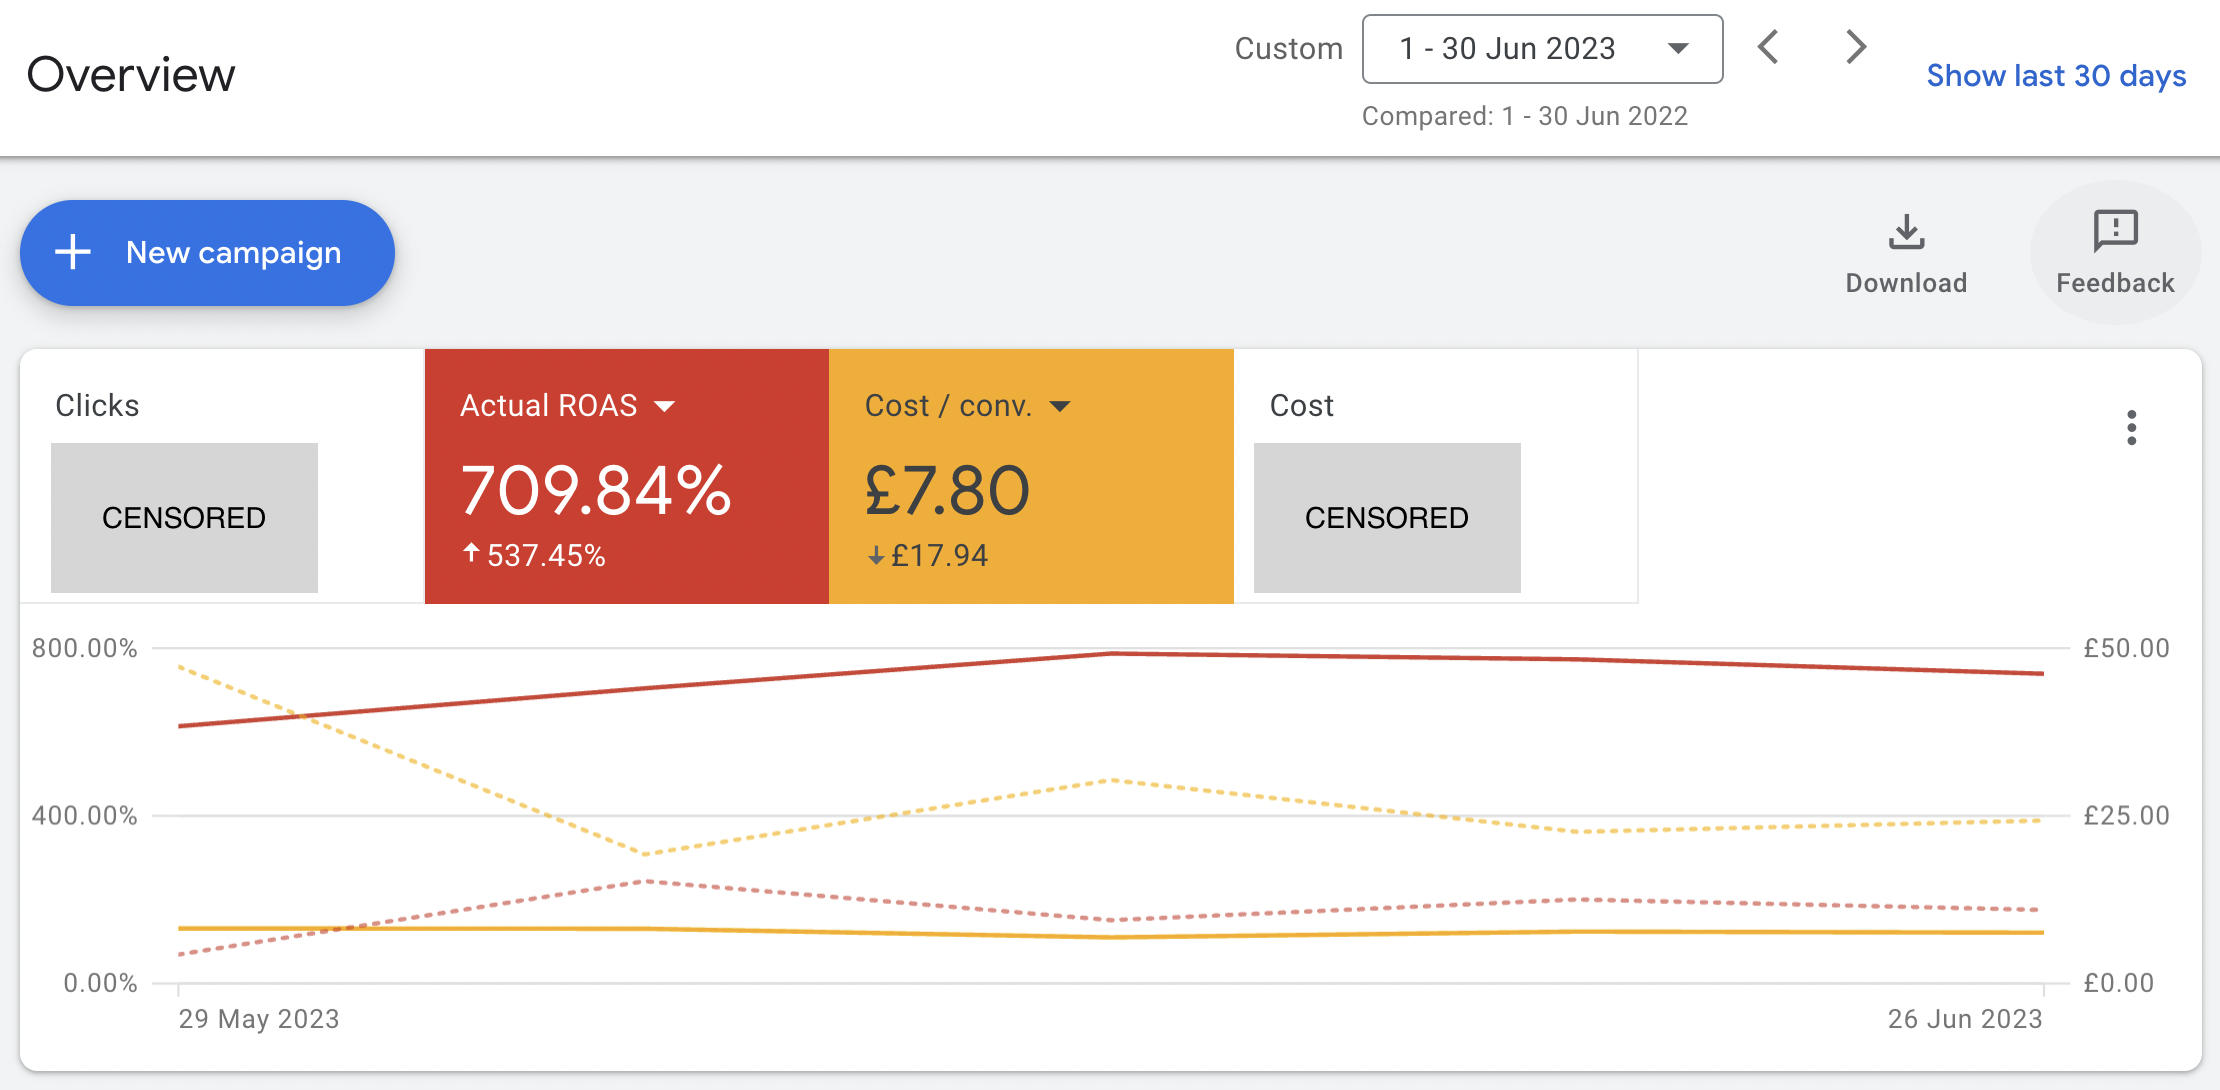 Graph showing paid search ROAS growth from 170% to over 700%, and CPA reduced from £25.75 to £7.80 in just 6 months